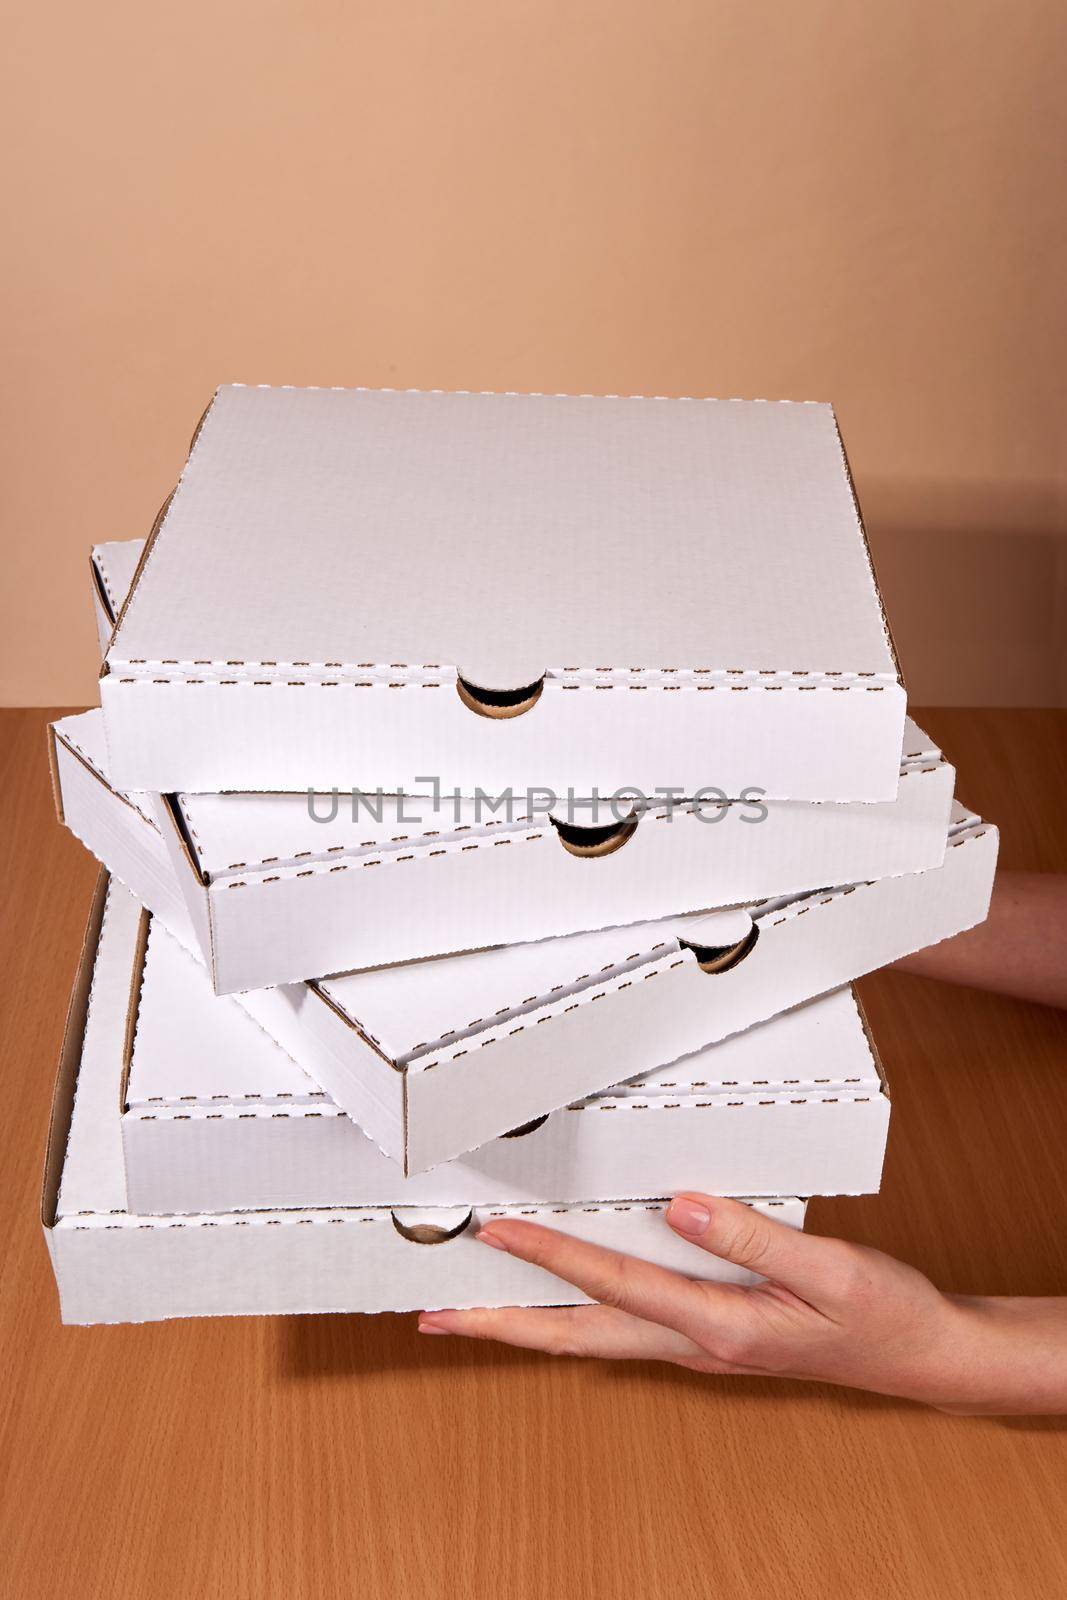 Hands stretching boxes with pizza home delivery by Demkat